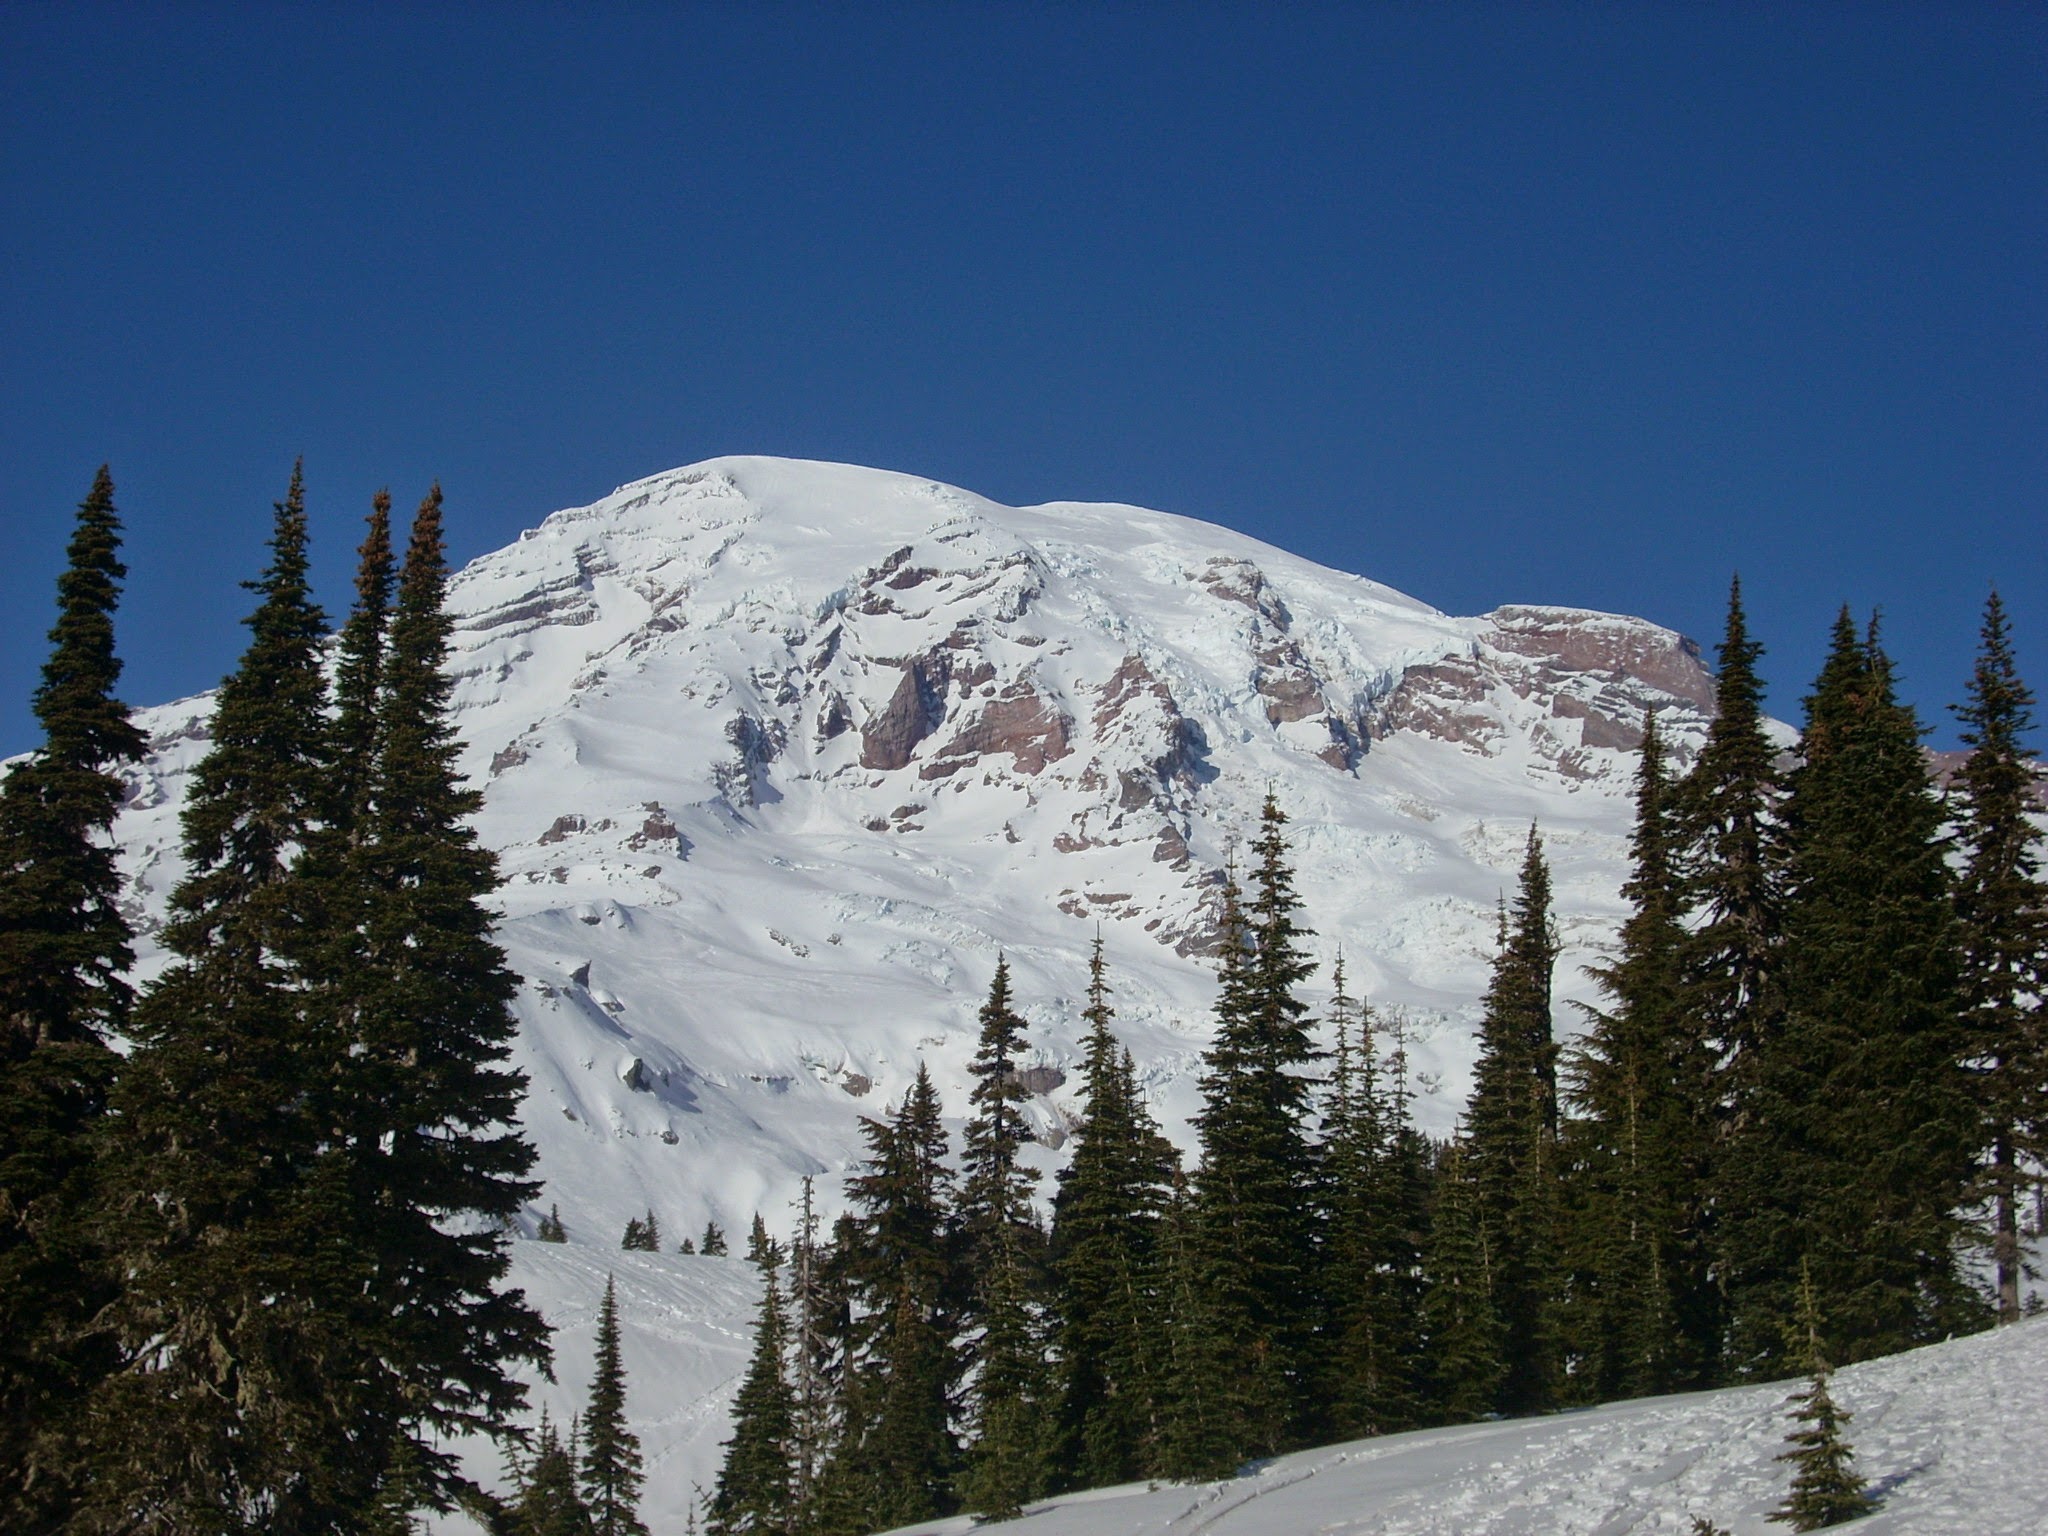 A large snow covered volcano with evergreen trees in the foreground